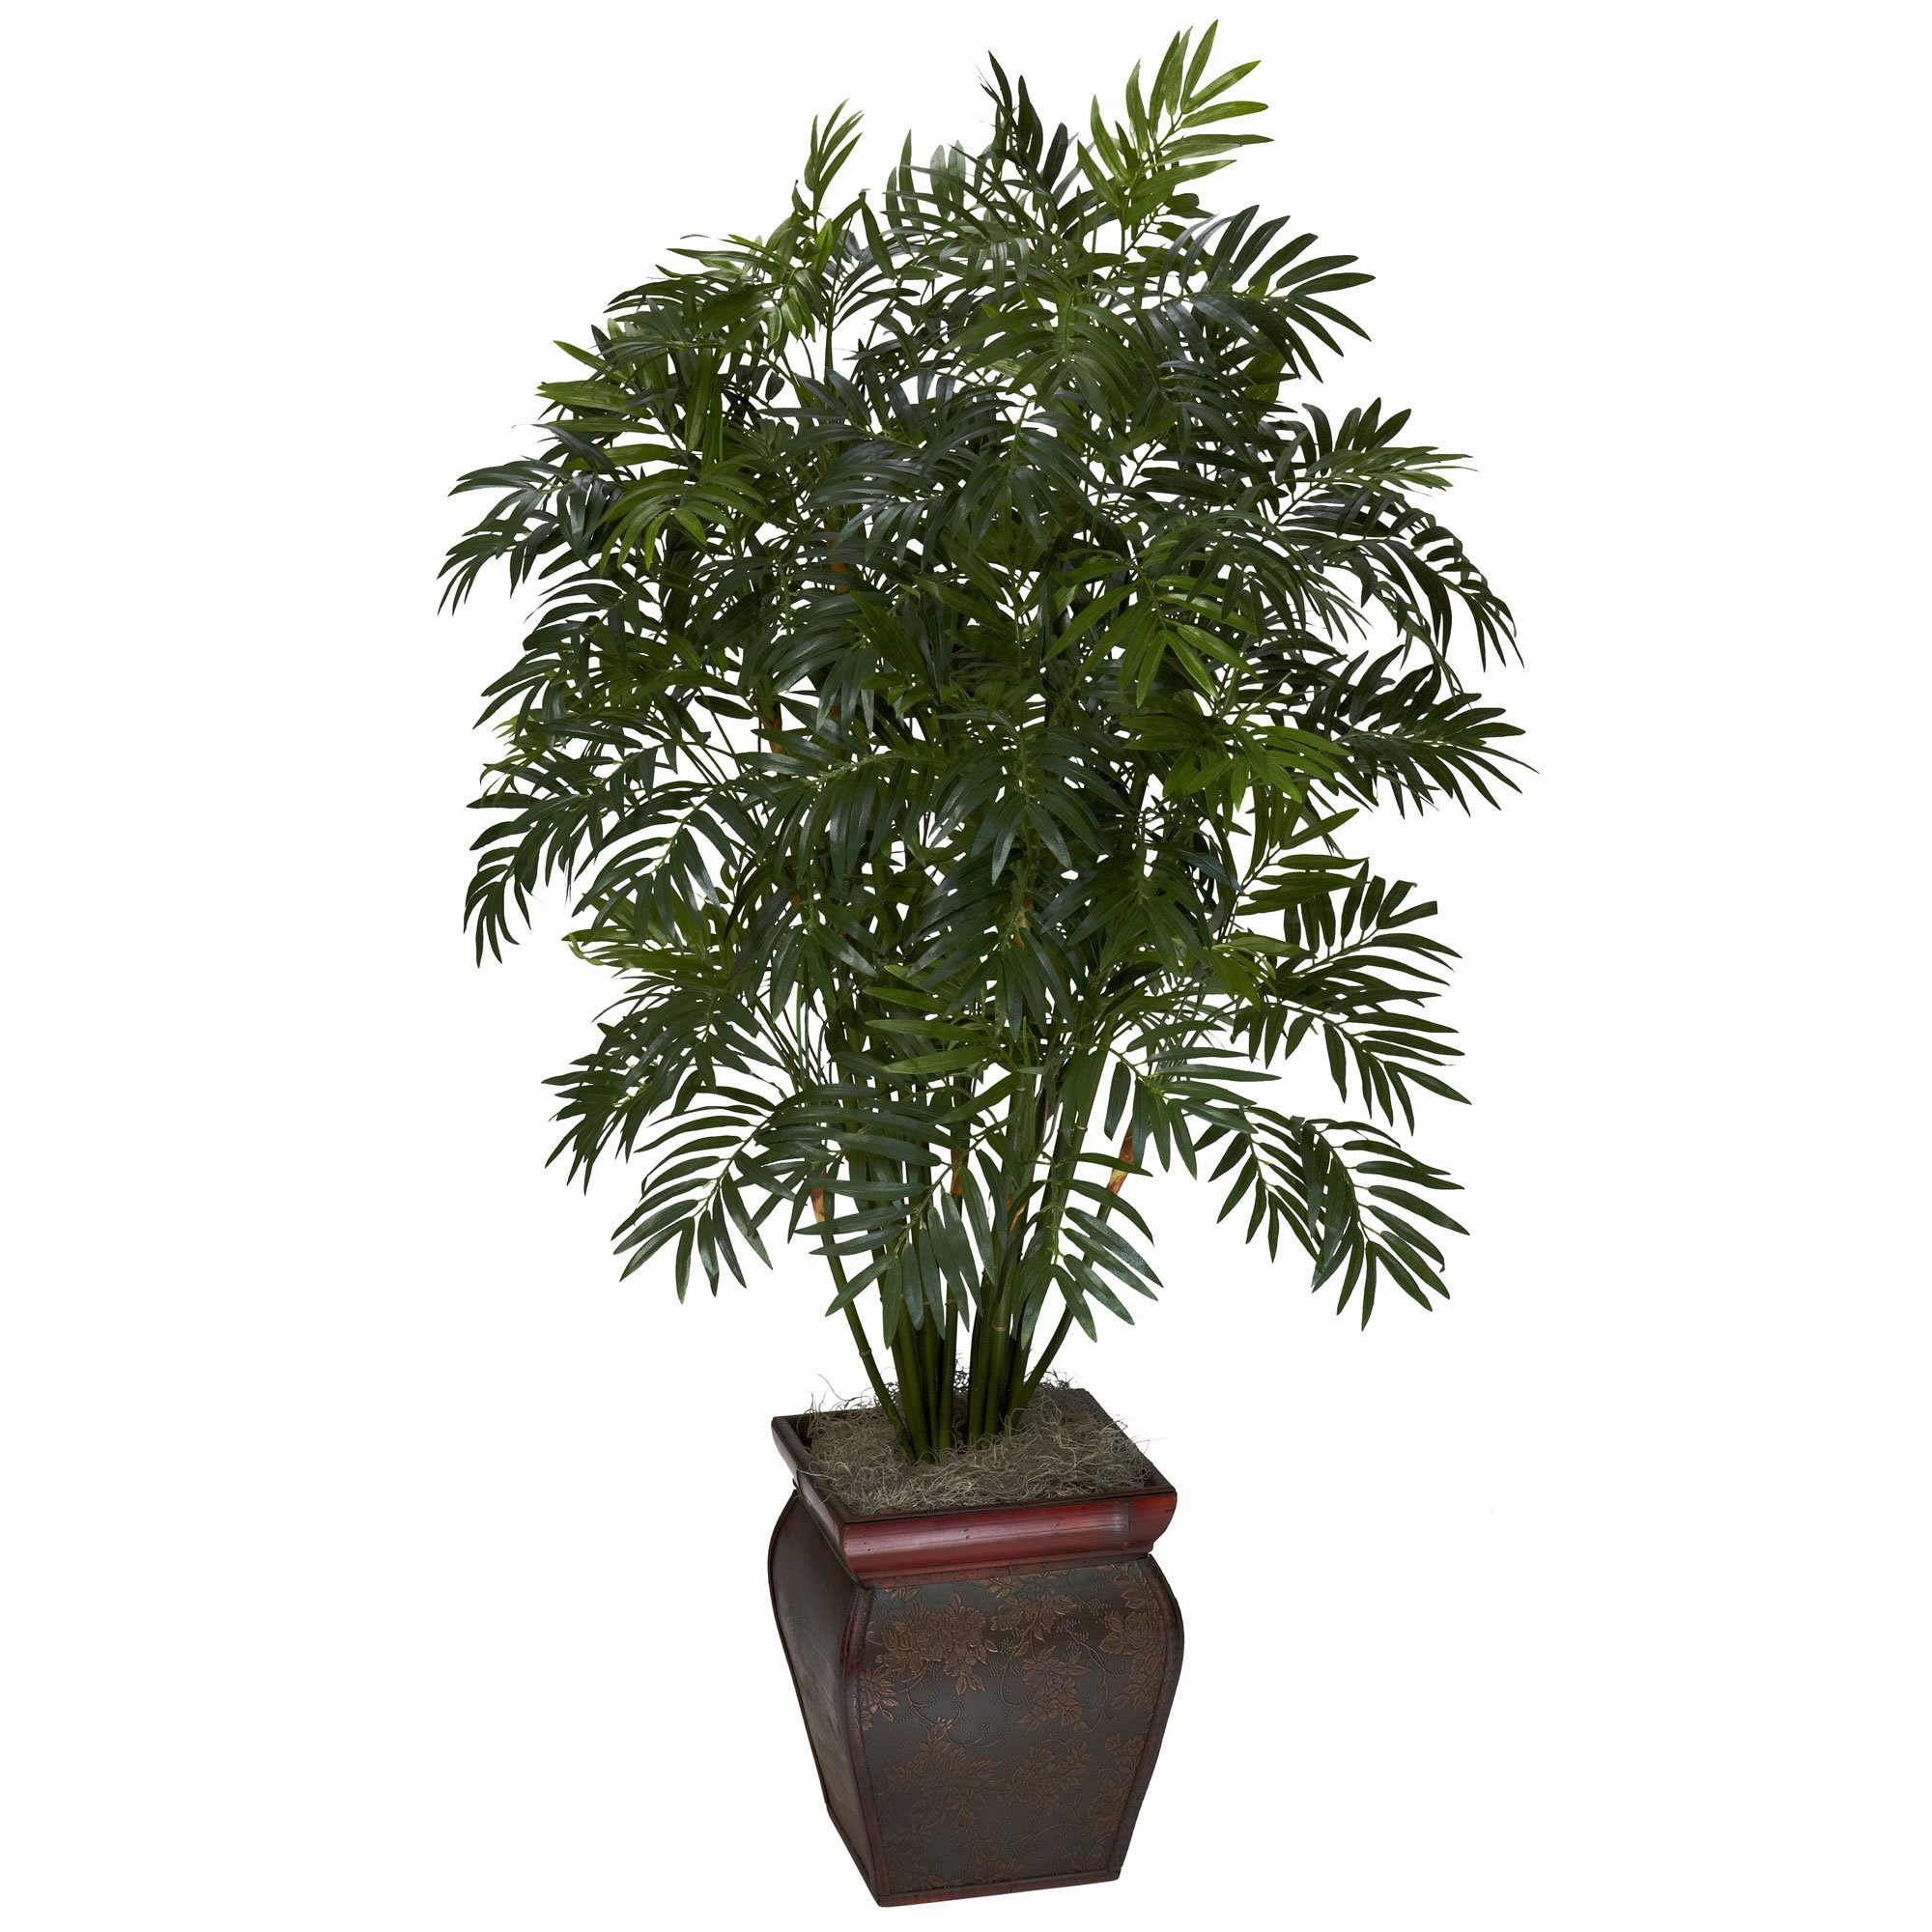 22 Fashionable Bamboo Vase 2022 free download bamboo vase of artificial trees home depot trend mini bamboo palm w decorative vase regarding artificial trees home depot trend mini bamboo palm w decorative vase